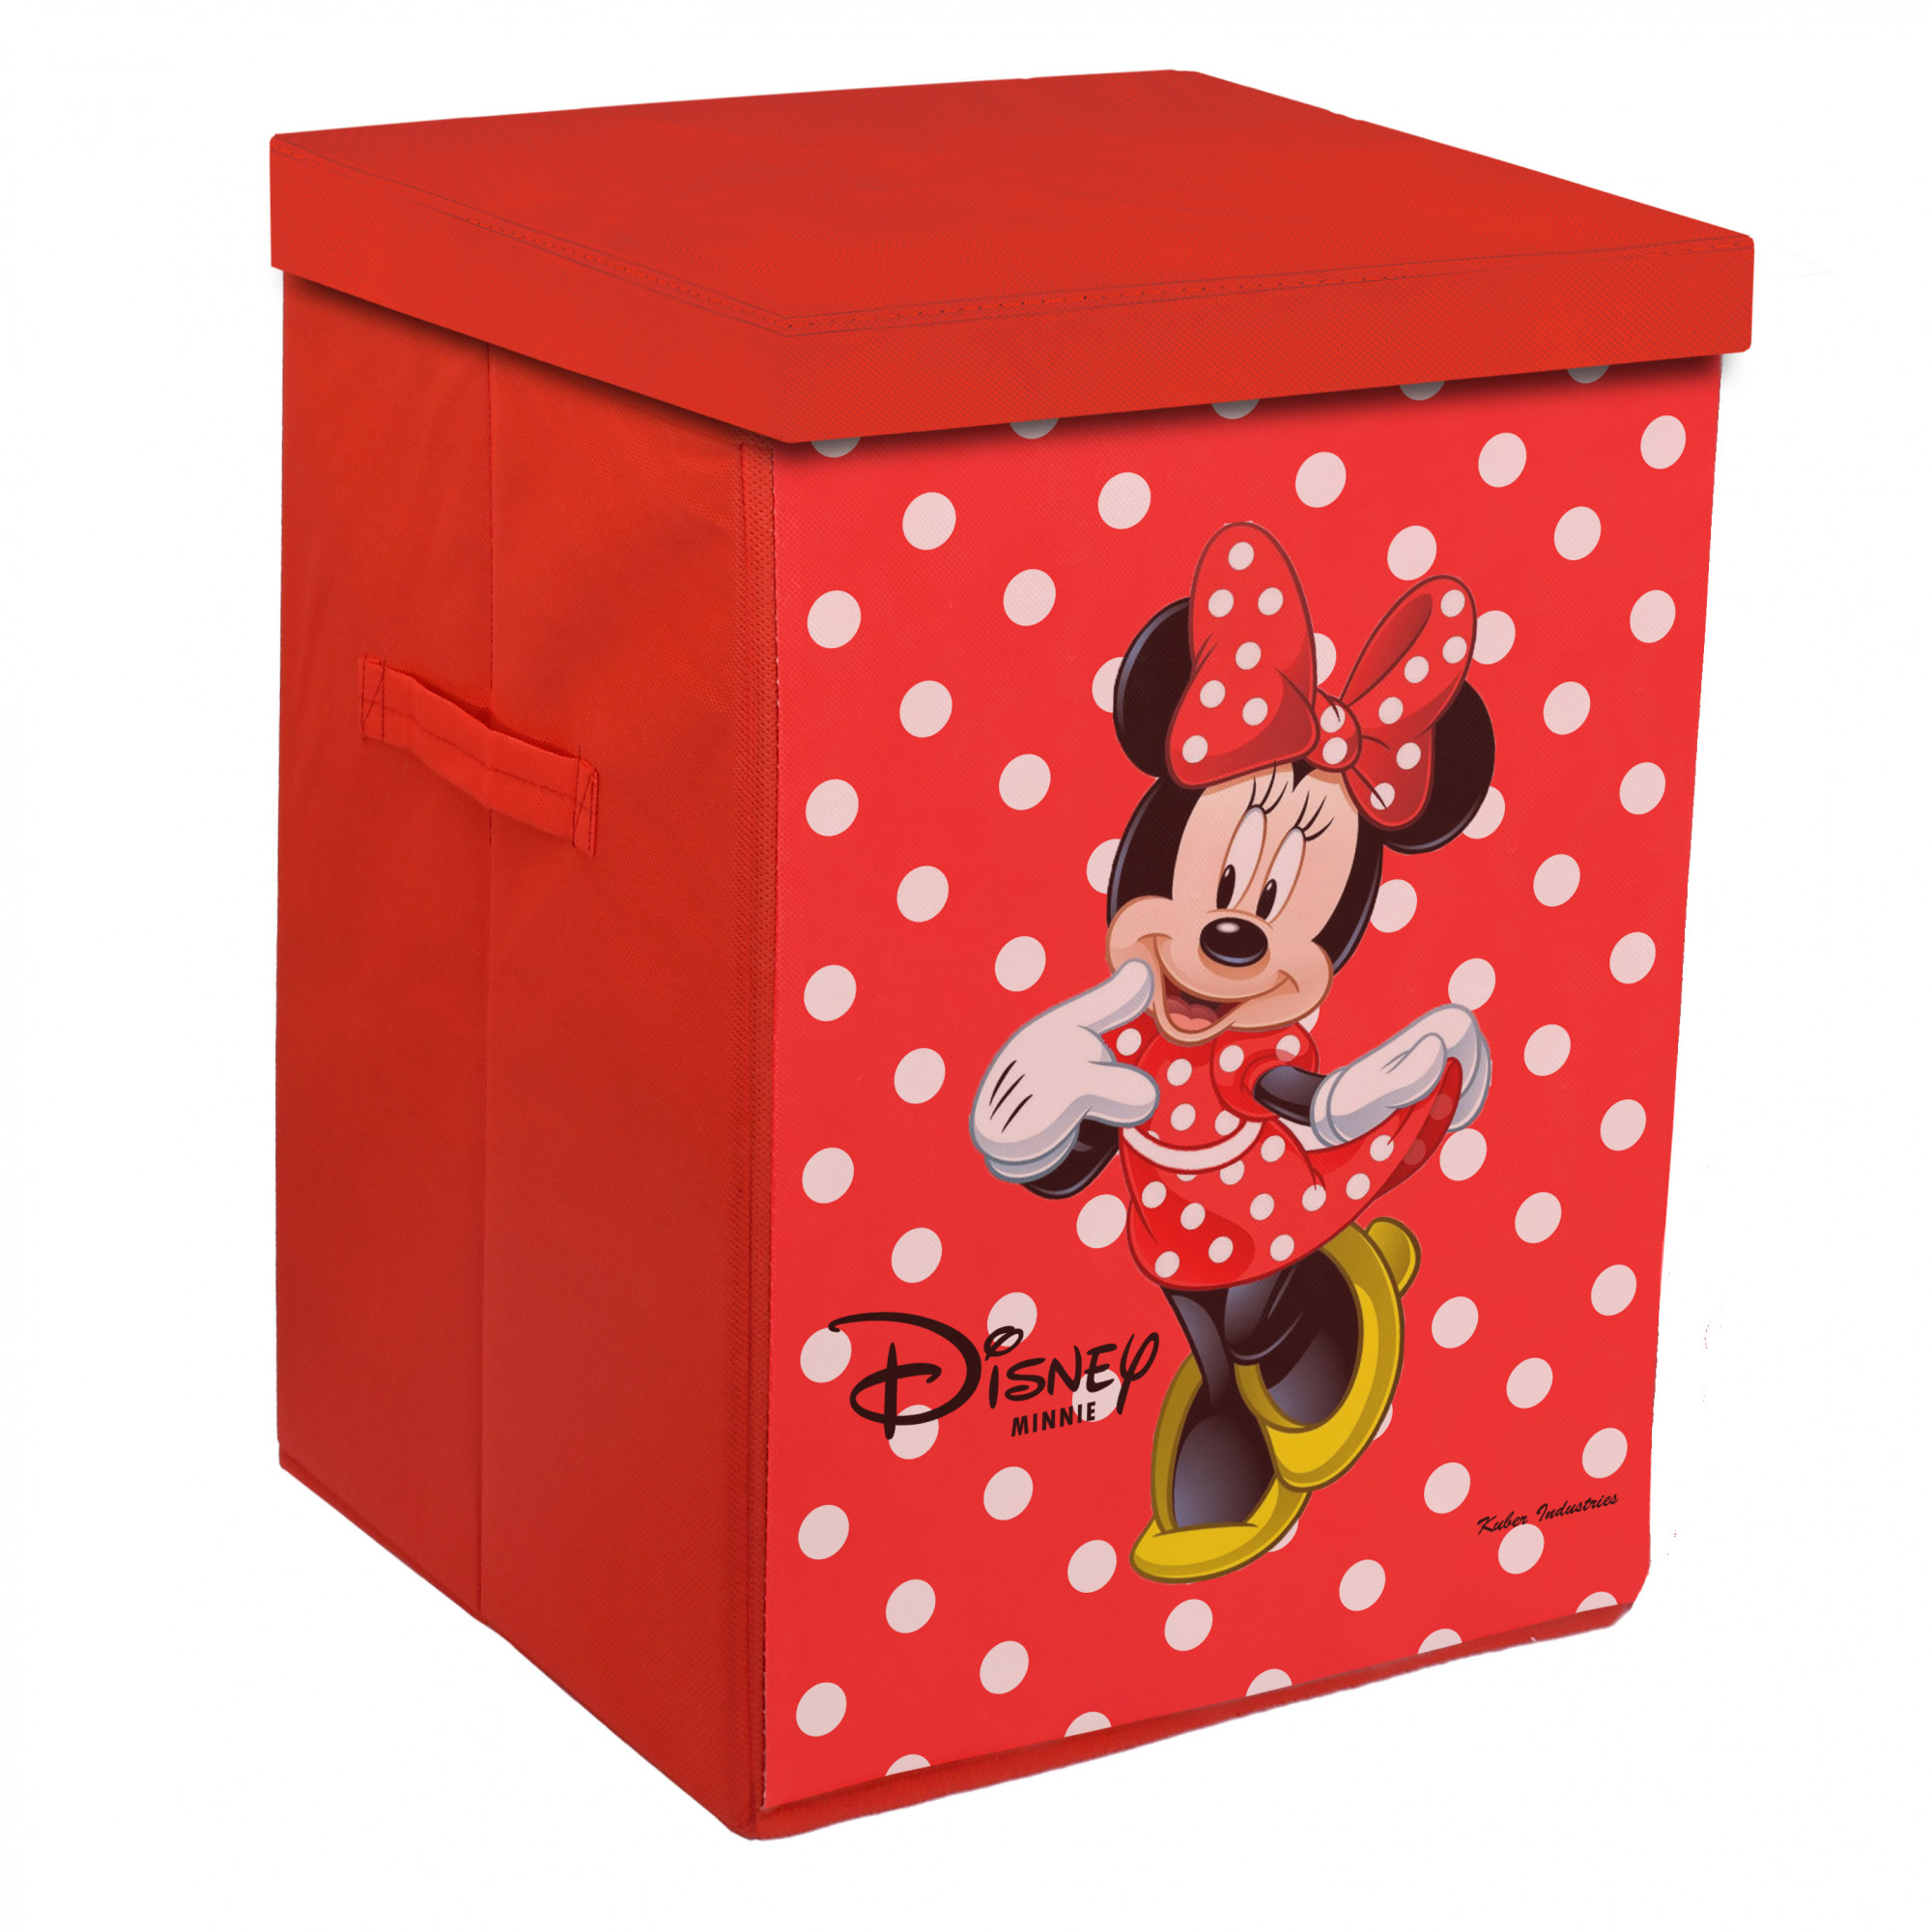 Kuber Industries Disney Minnie Mickey Mouse Print Non Woven Fabric Foldable Laundry Basket , Toy Storage Basket, Cloth Storage Basket with Lid & Handles (Set Of 2, Black & Red)-KUBMART1220